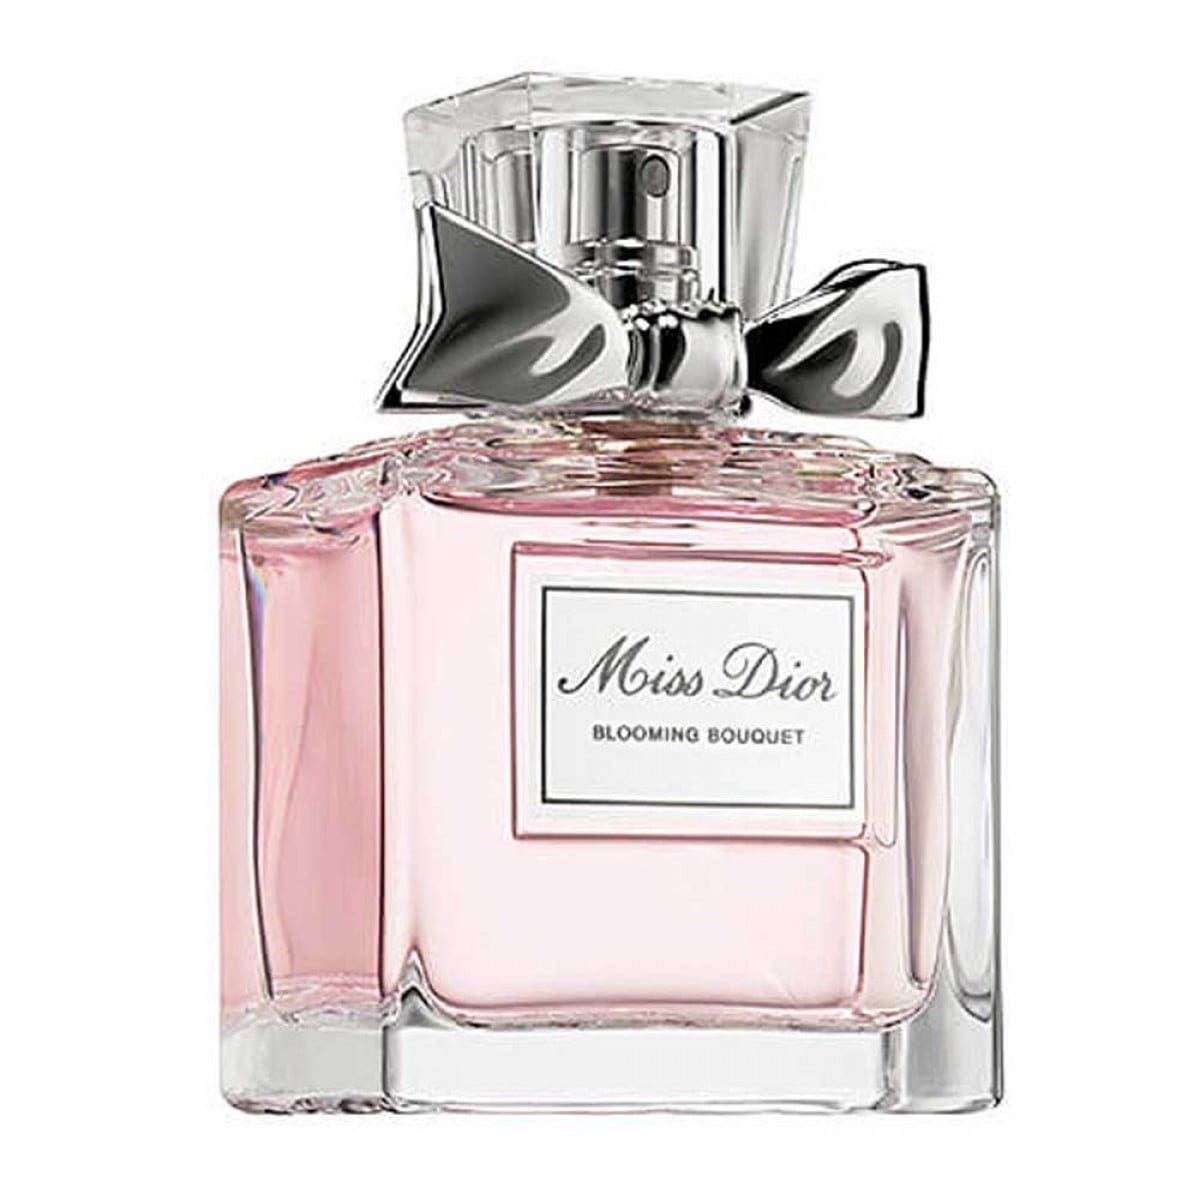 Miss Dior Blooming Bouquet by Christian Dior, 5 oz EDT Spray for Women 